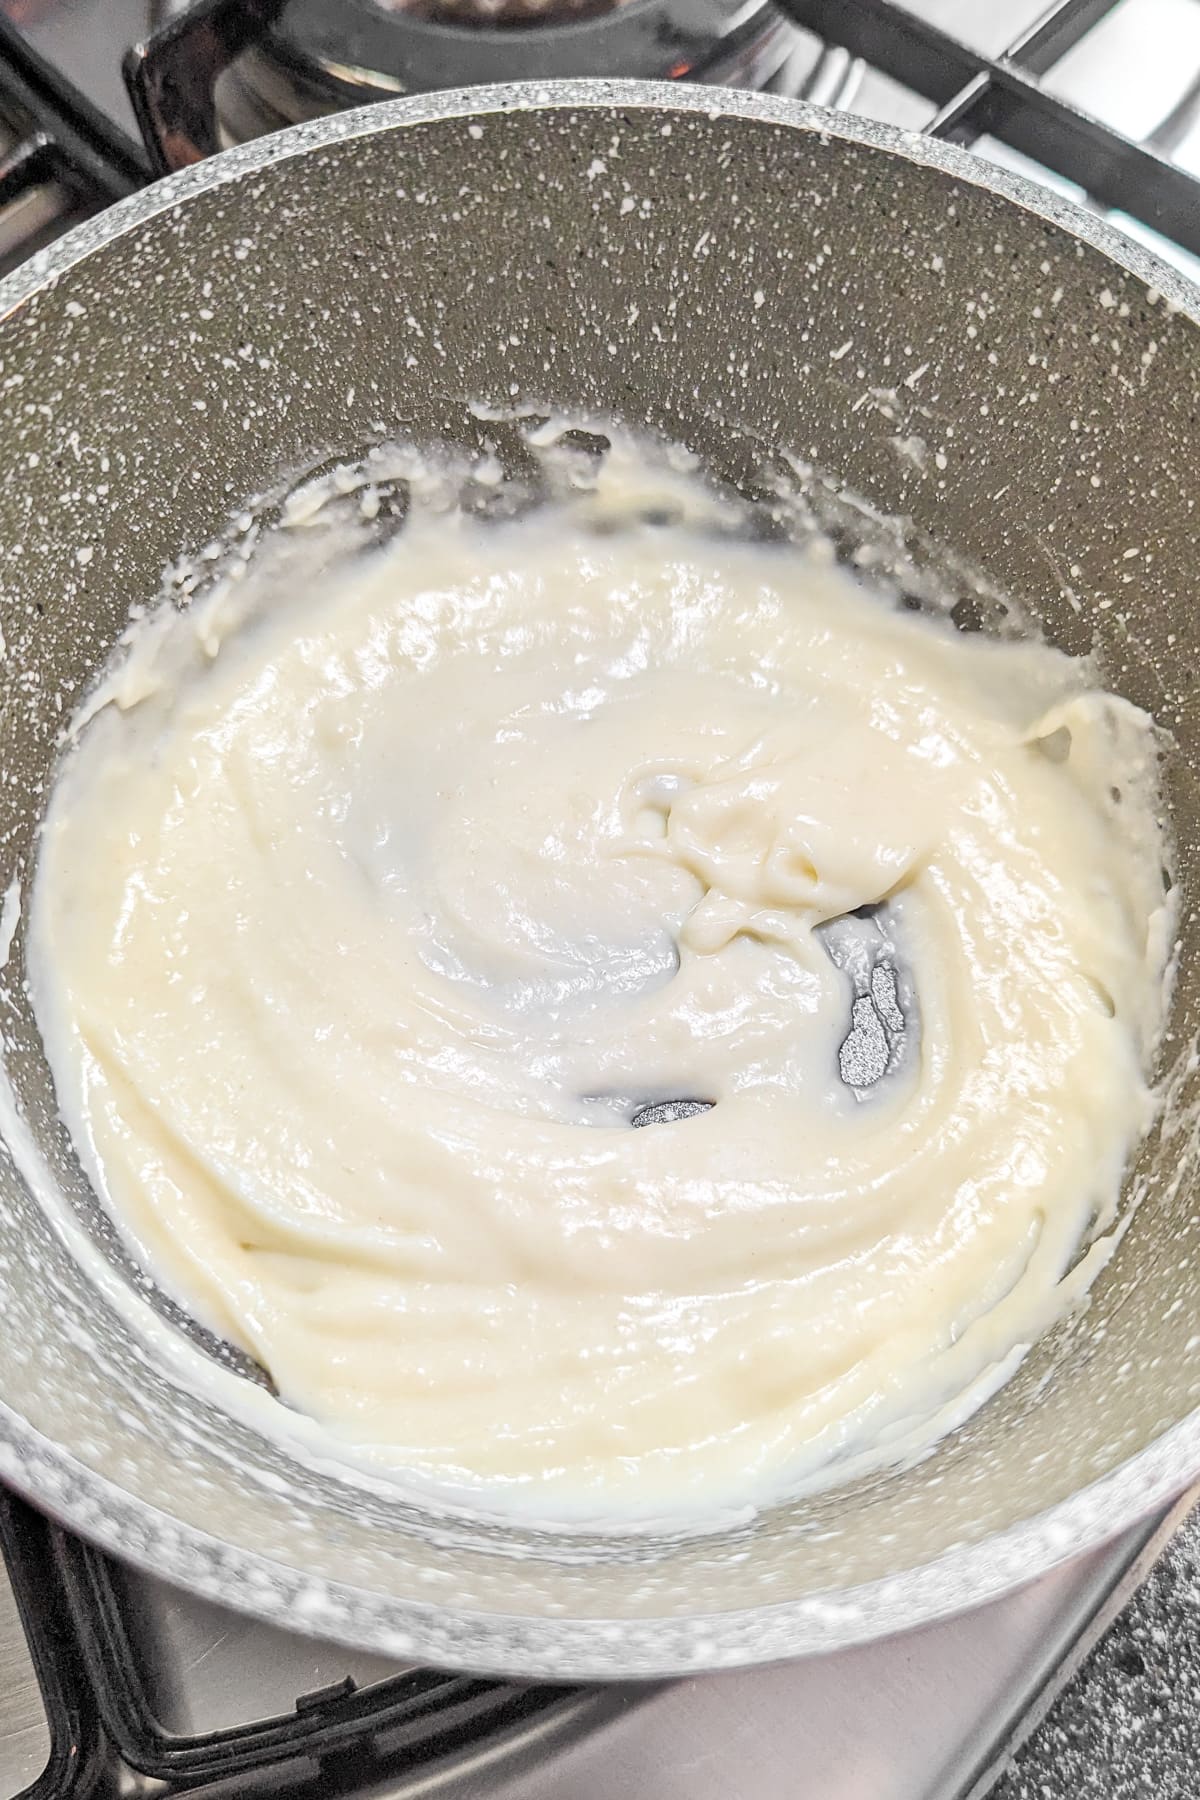 Mixed milk with flour and butter in a gray saucepan on the stove.